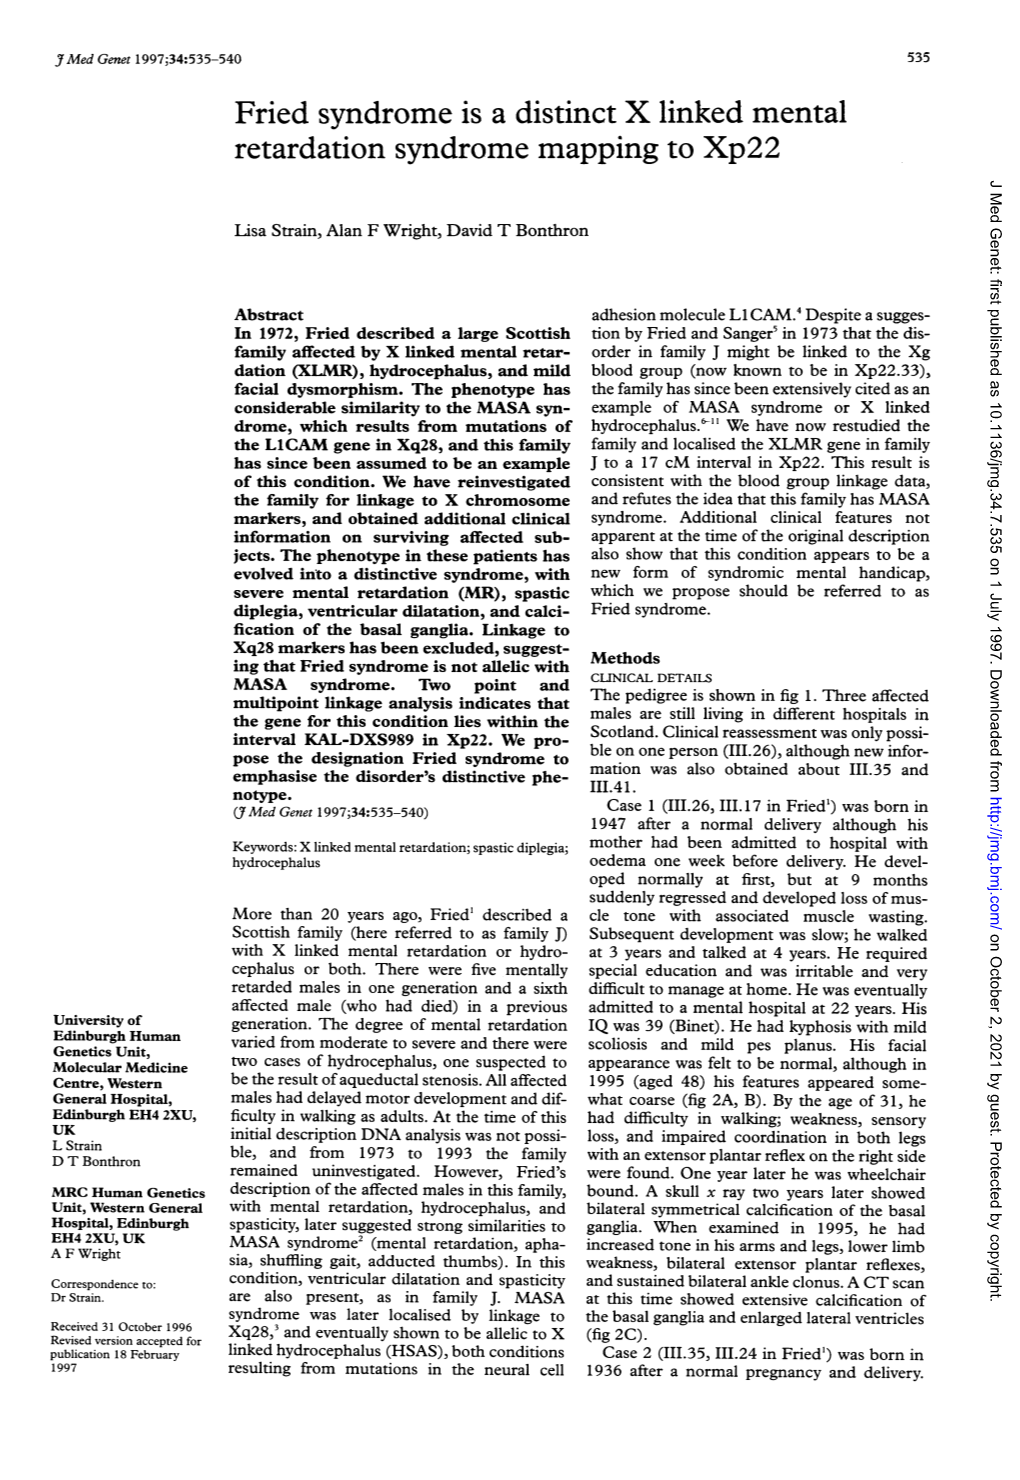 Retardation Syndrome Mapping to Xp22 J Med Genet: First Published As 10.1136/Jmg.34.7.535 on 1 July 1997